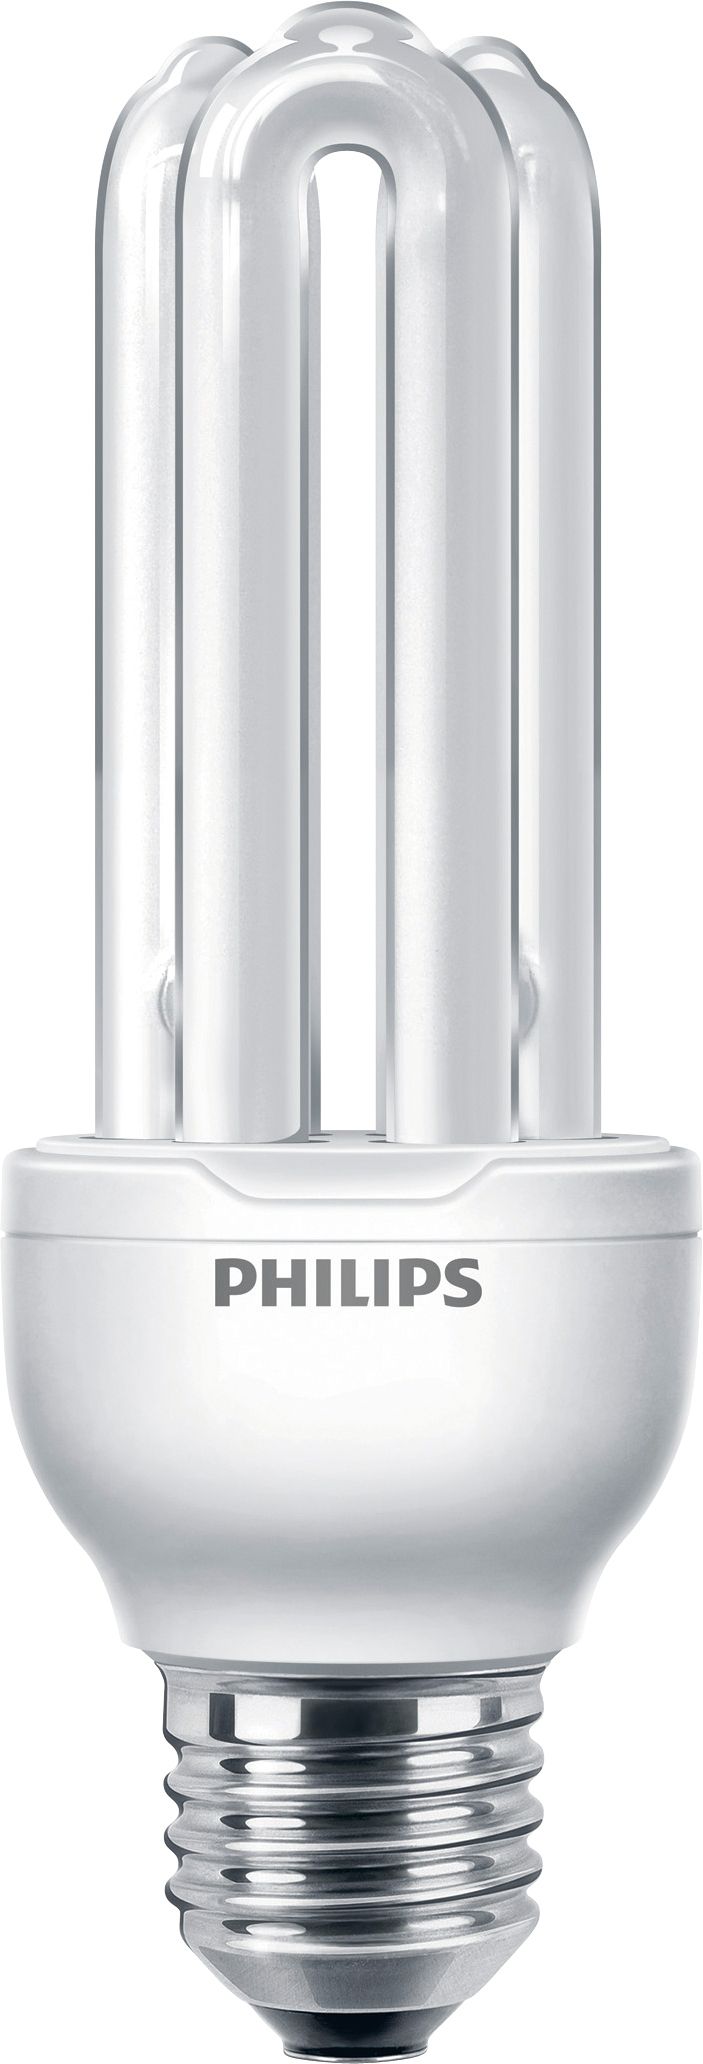 Philips Energy Saving 2D Style CFL Lamp 16W 2 Pin 1050lm